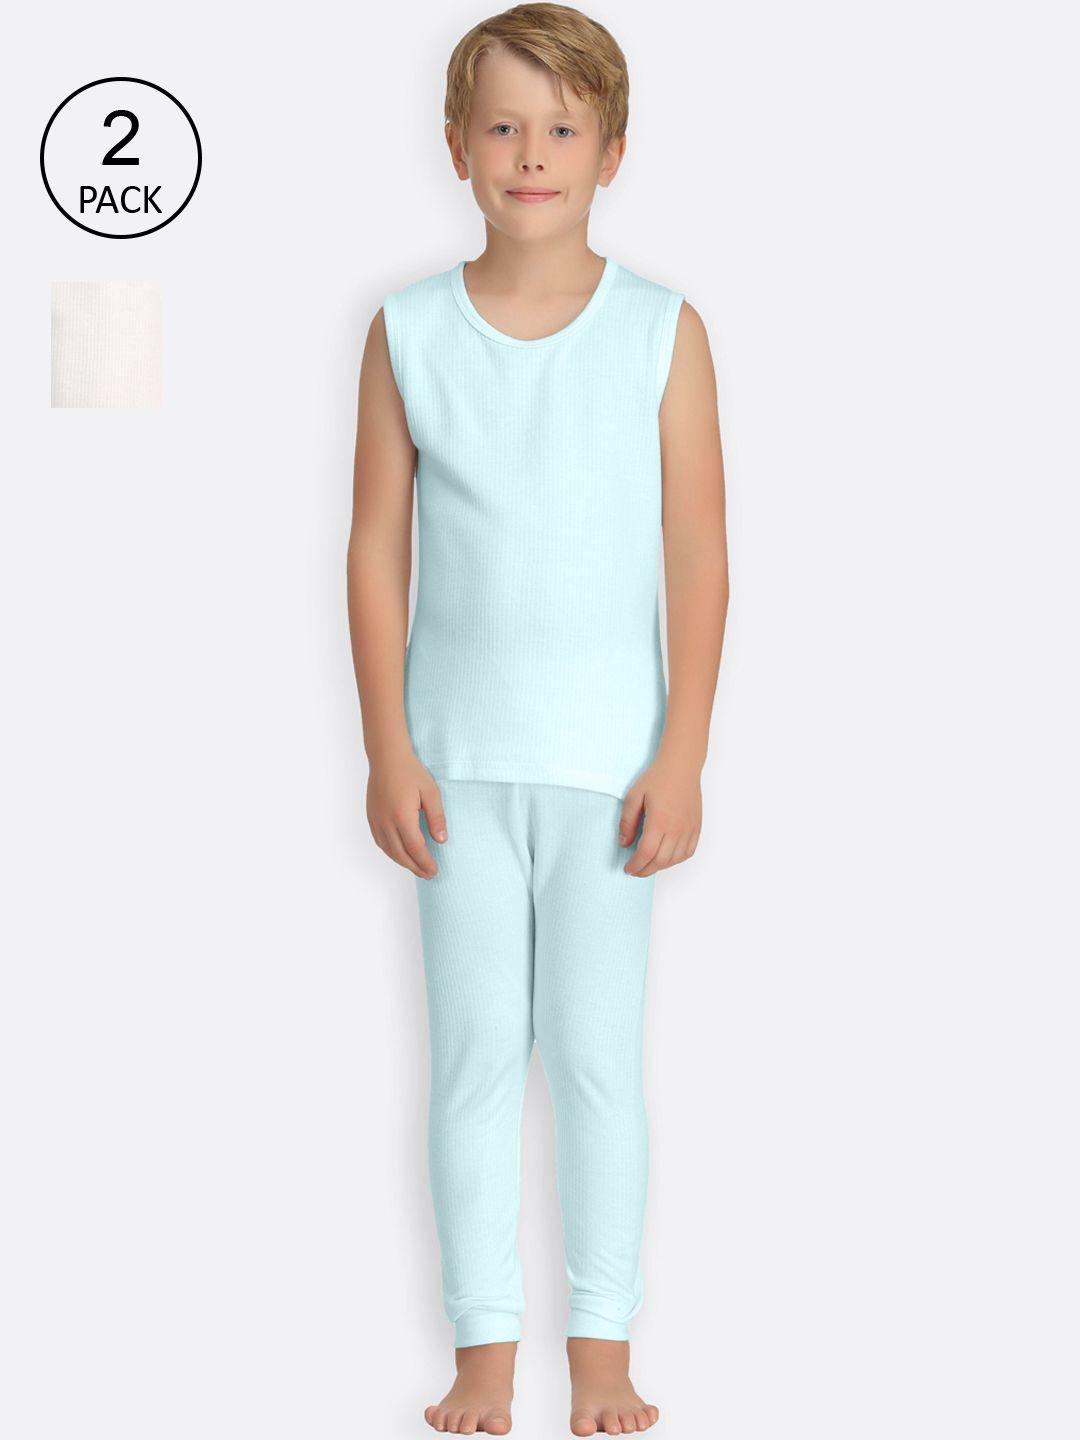 kanvin boys turquoise blue & off-white set of 2 self striped thermal set